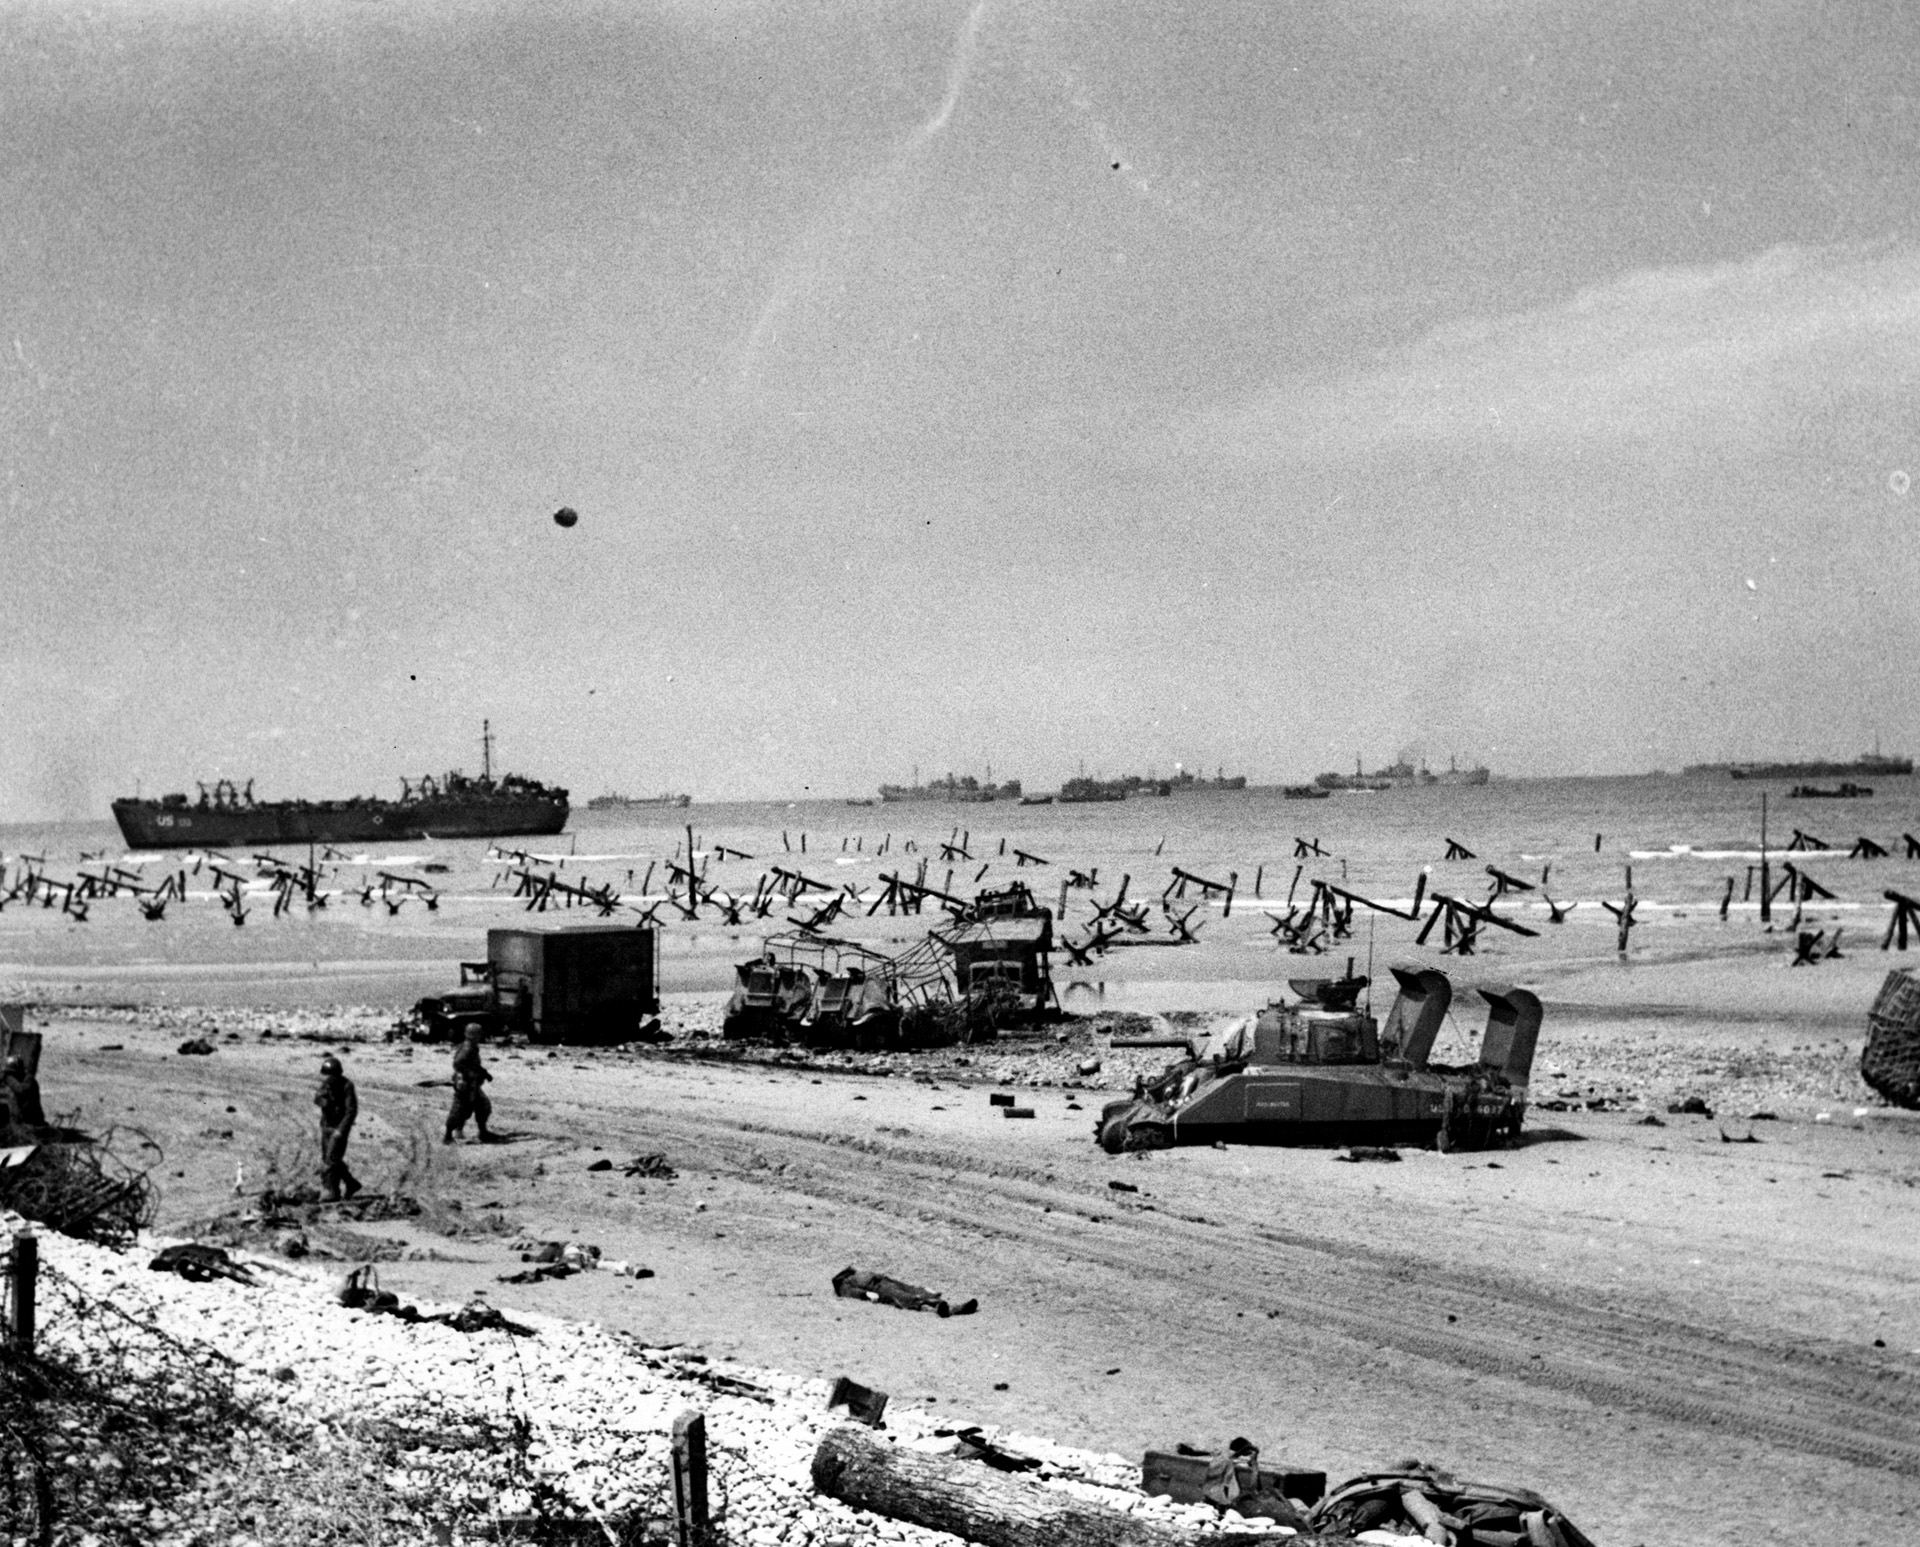 Low tide reveals the detritus of war strewn across the Easy Red sector of Omaha Beach, but the battle, although costly, has been won. Hitler’s supposedly impregnable “Atlantic Wall” is breached within the span of a morning.